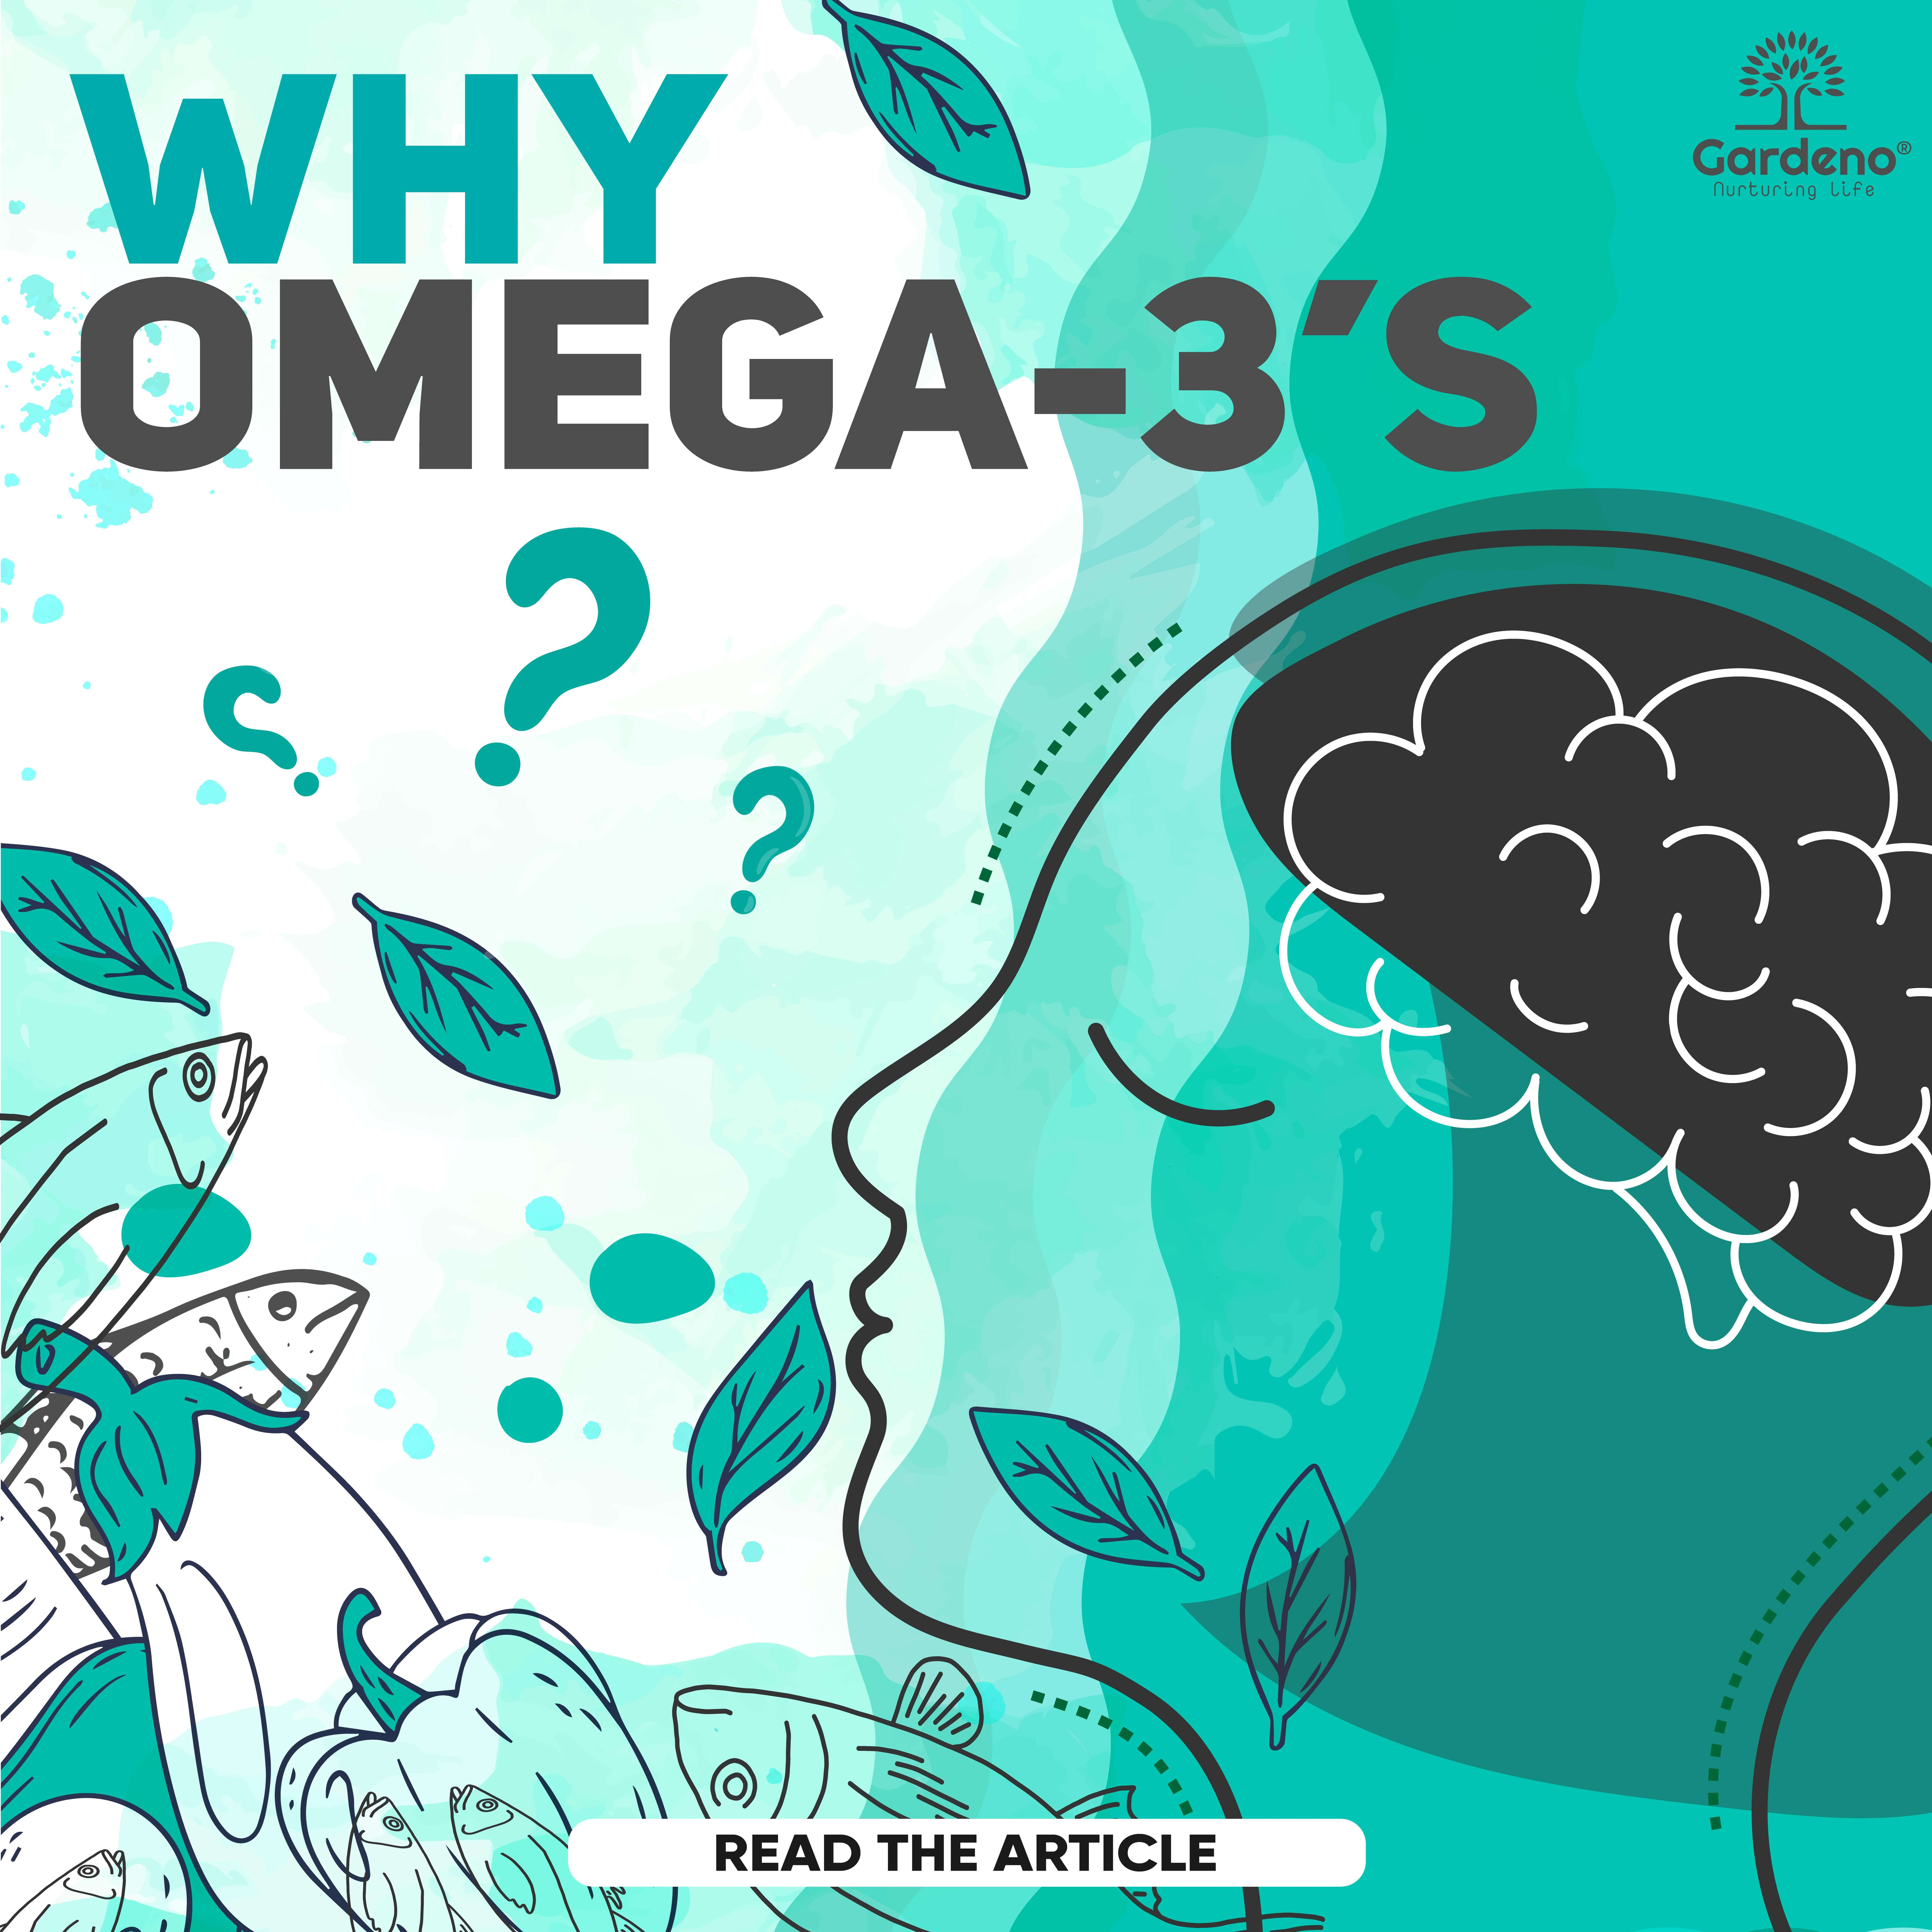 Your complete guide to “What and why” while buying Omega-3 supplements